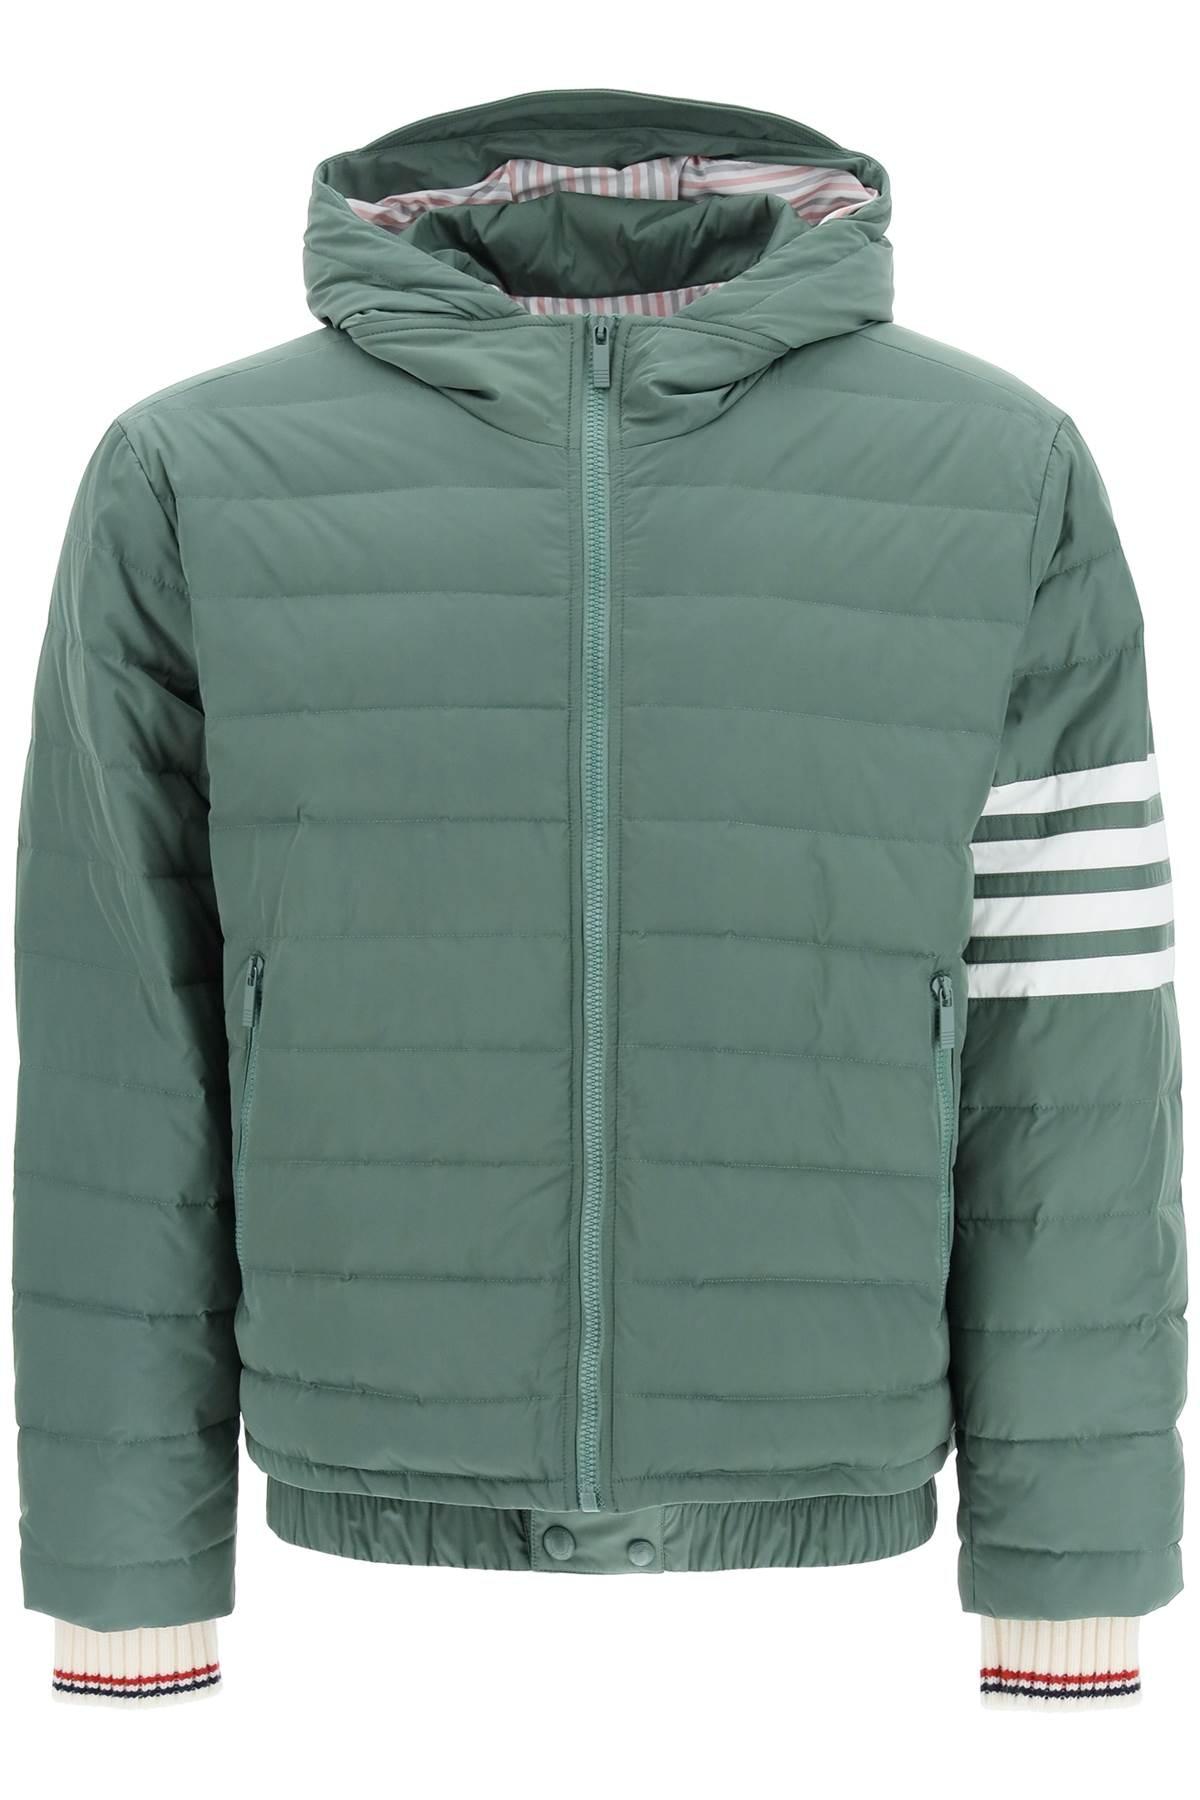 Thom Browne 4-bar Down Jacket In Poly Twill in Green for Men | Lyst